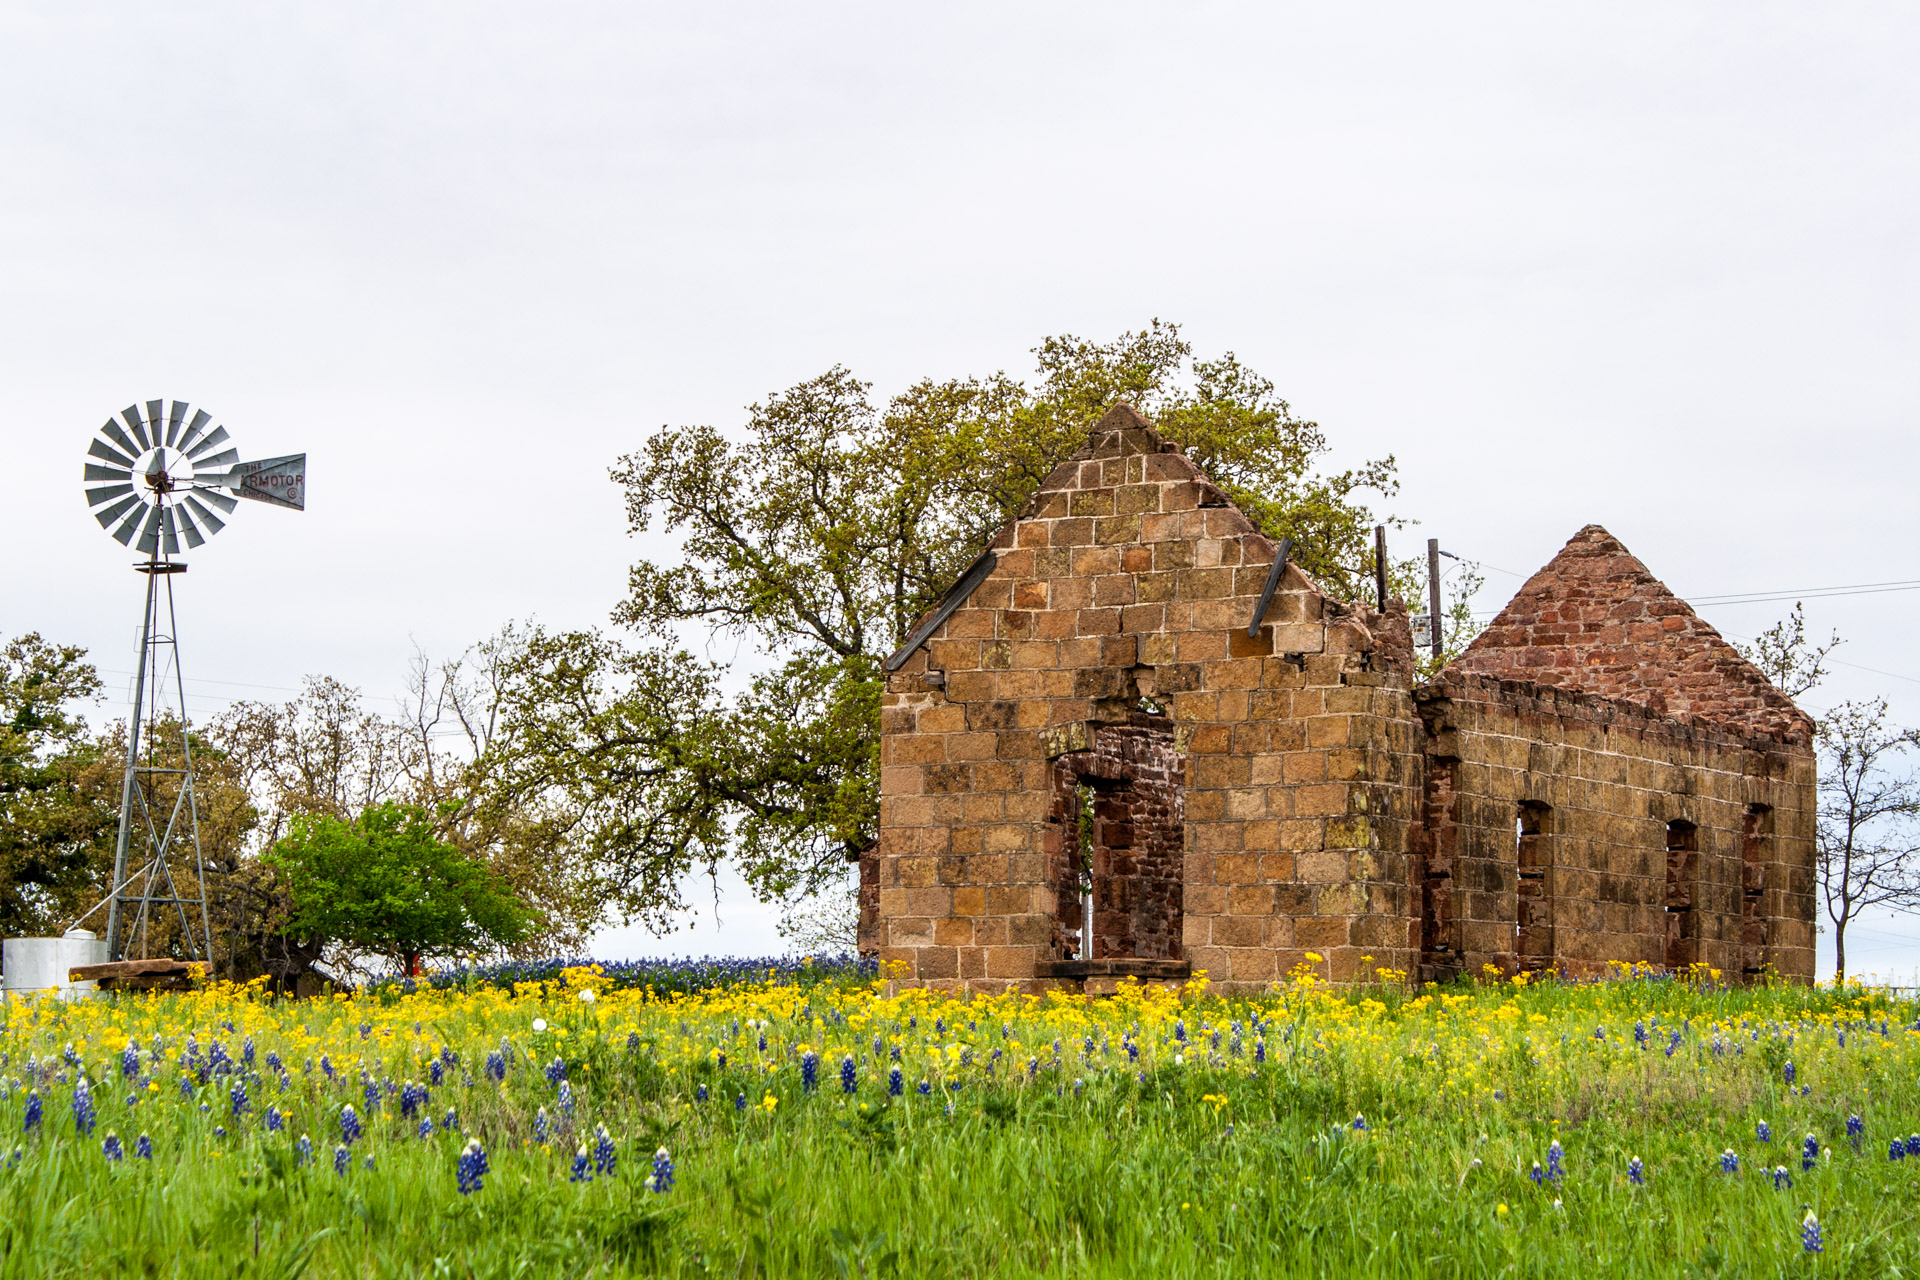 Pontotoc, Texas - A Stone Ruin With Bluebonnets (back far)